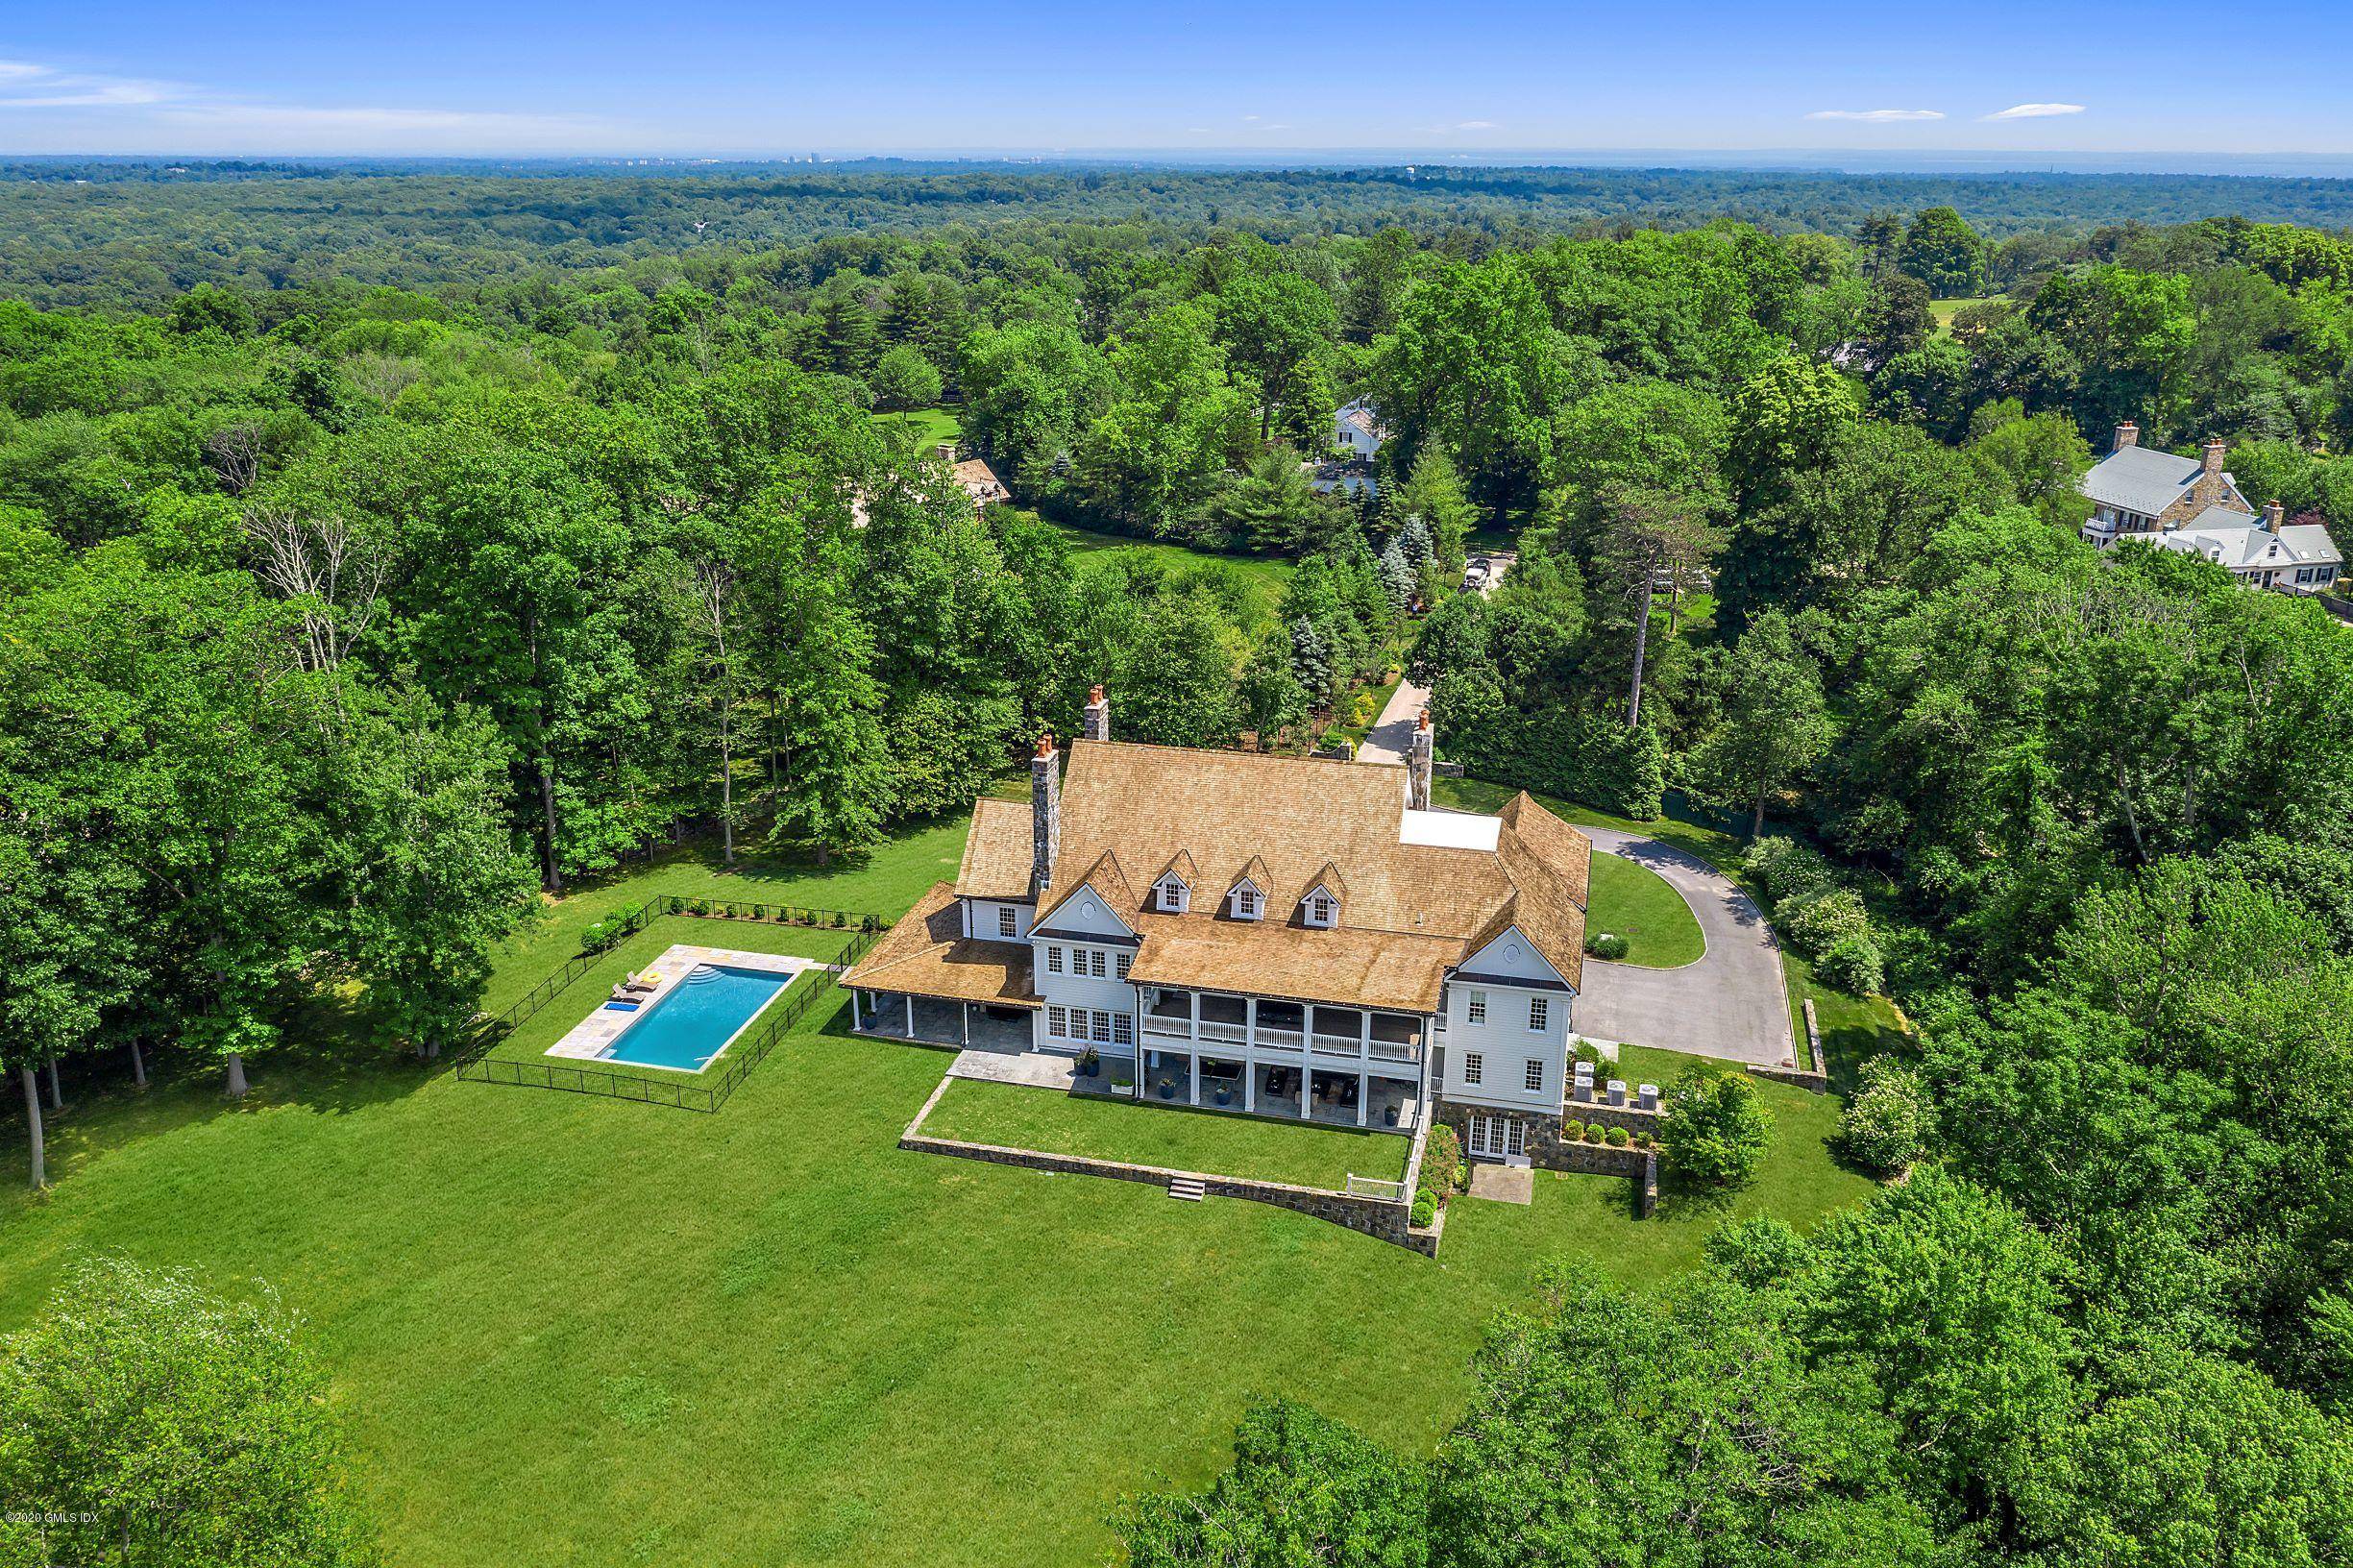 Magnificent 2013 Georgian Colonial situated on 4 private acres with a swimming pool plus room for tennis set off Round Hill Road in the bucolic back country of Greenwich.